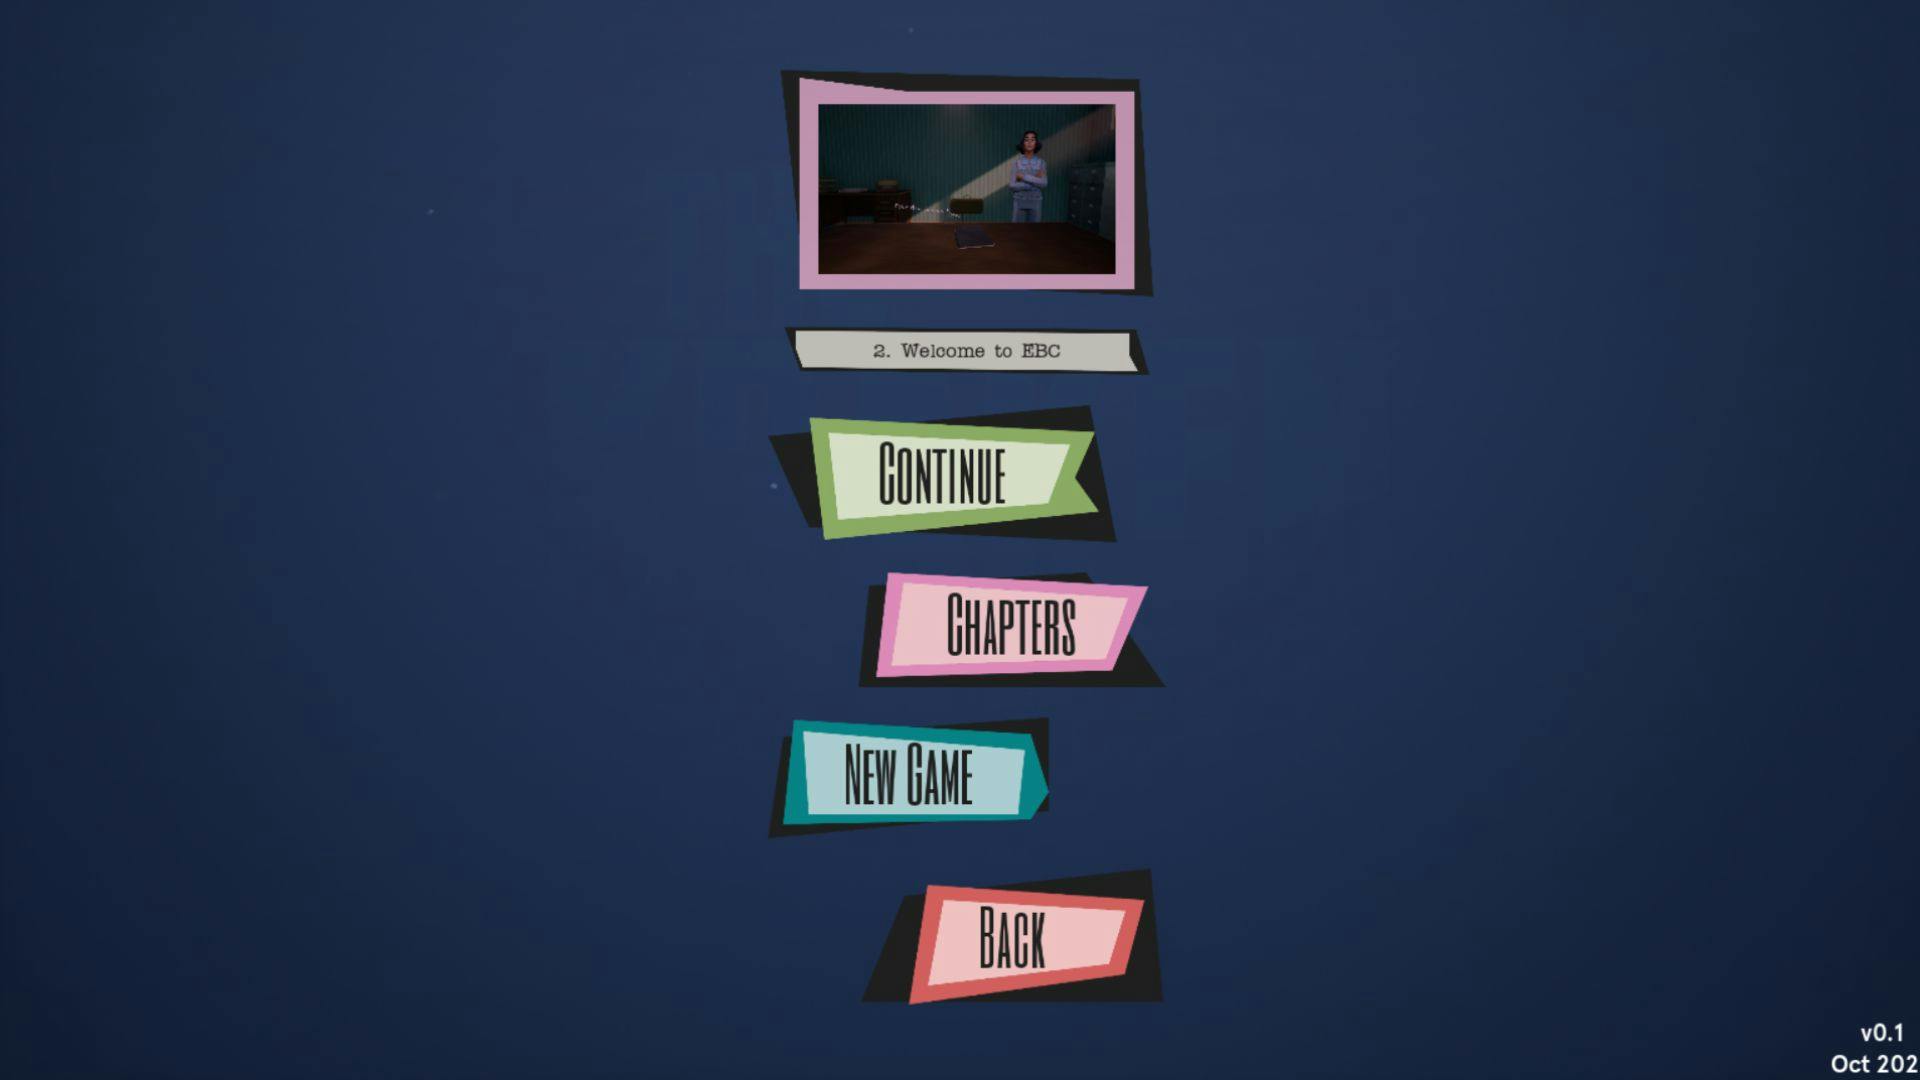 A game menu screen. The background is dark blue. In the centre, at the top, is a screenshot of the game with a chapter title underneath it. Below that are four jagged buttons in green, pink, turquoise and red. They read 'Continue', 'Chapters', 'New game' and 'Back'. 